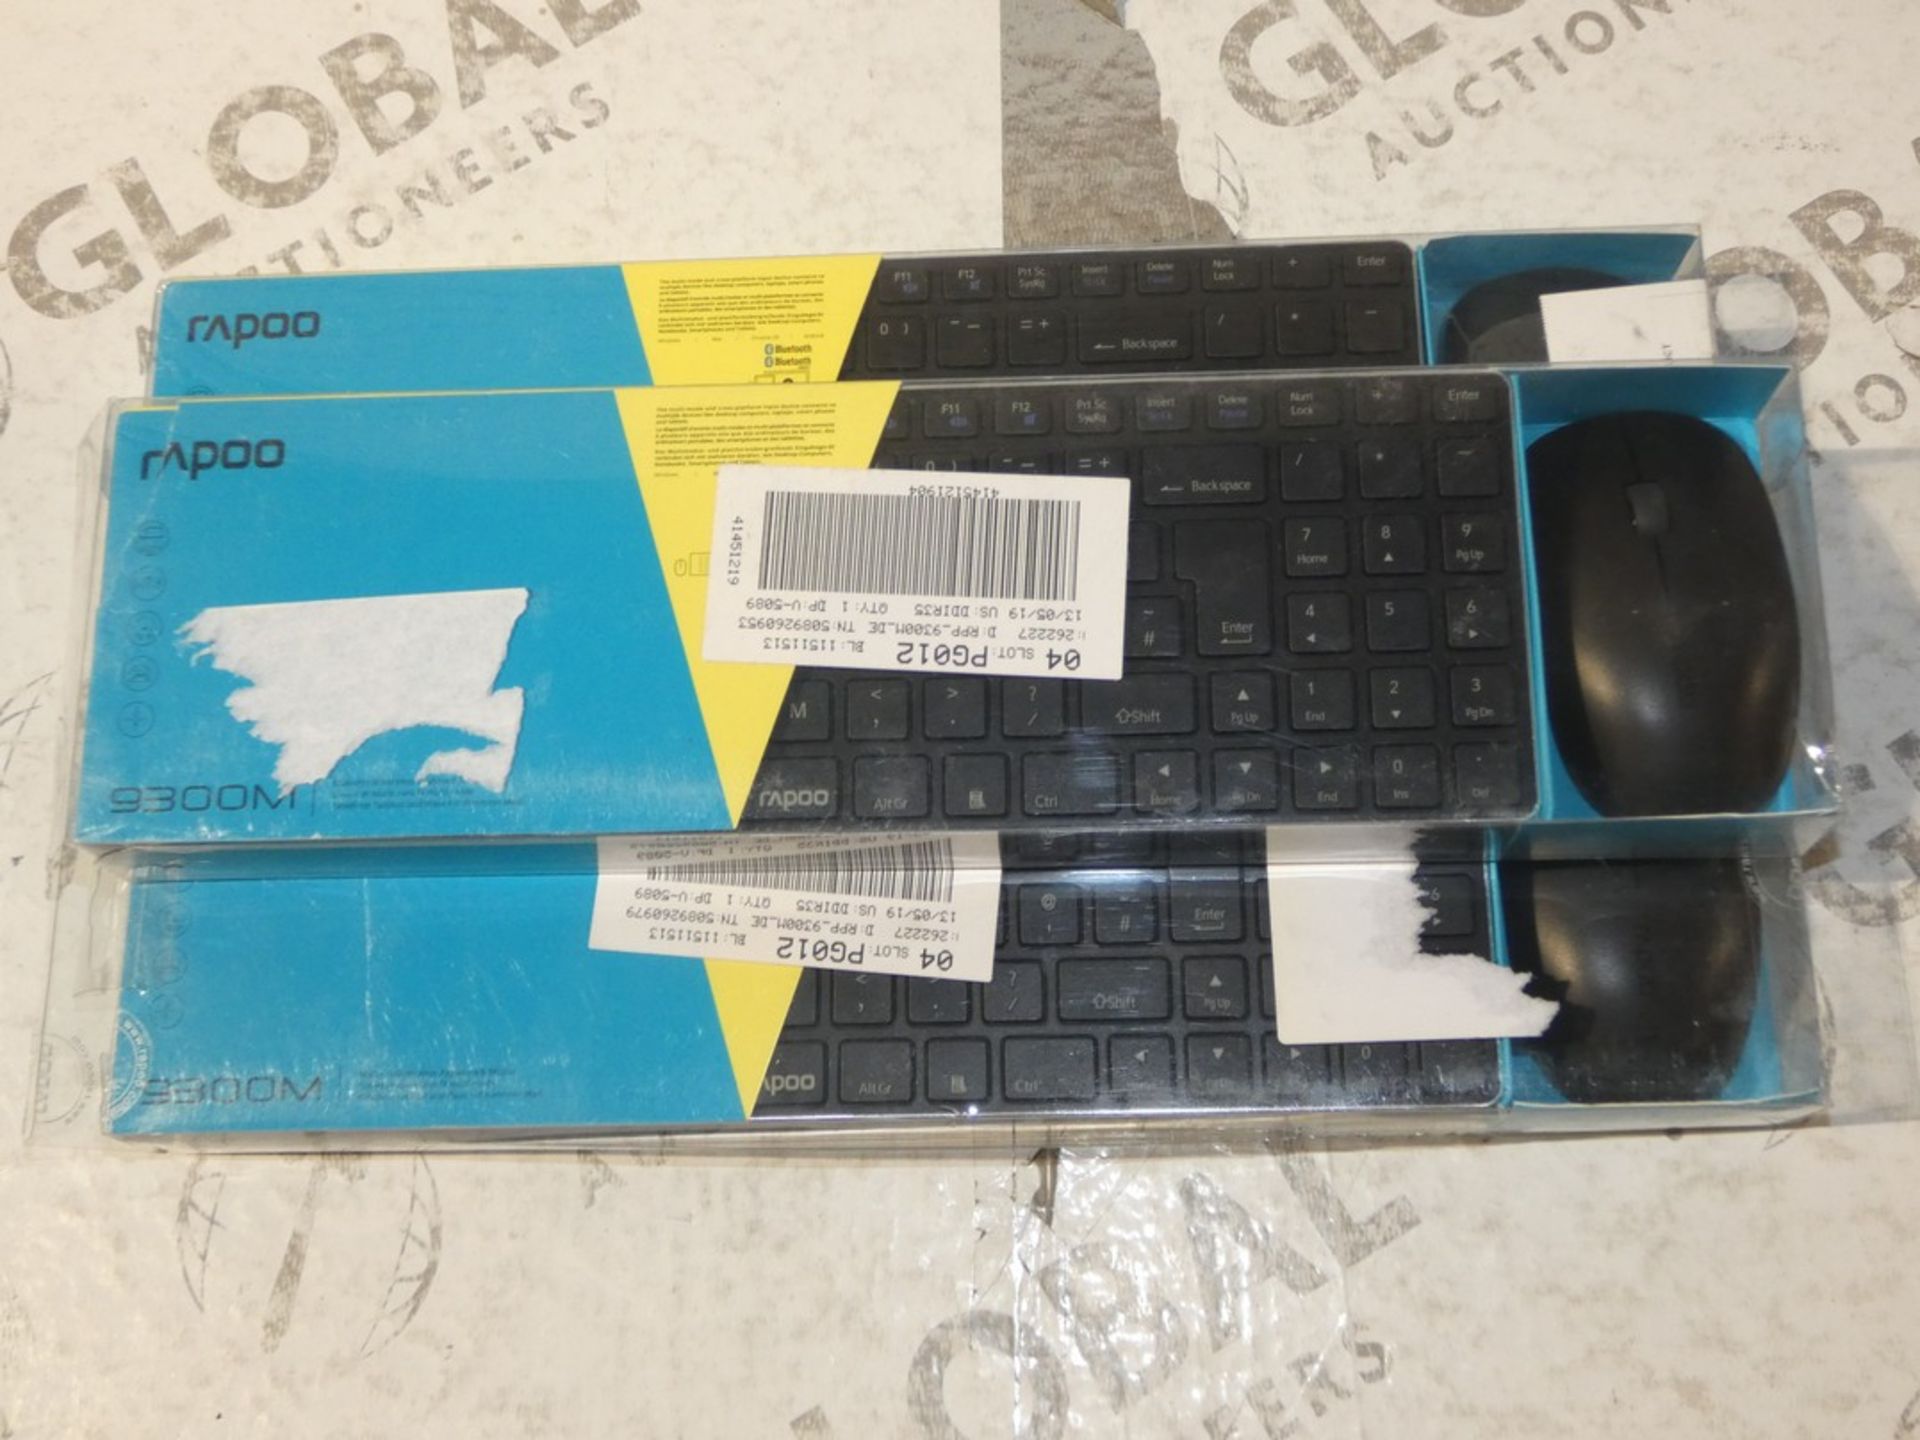 Boxed RVP00 9300M Multi Mode Wireless Keyboard and Mouse